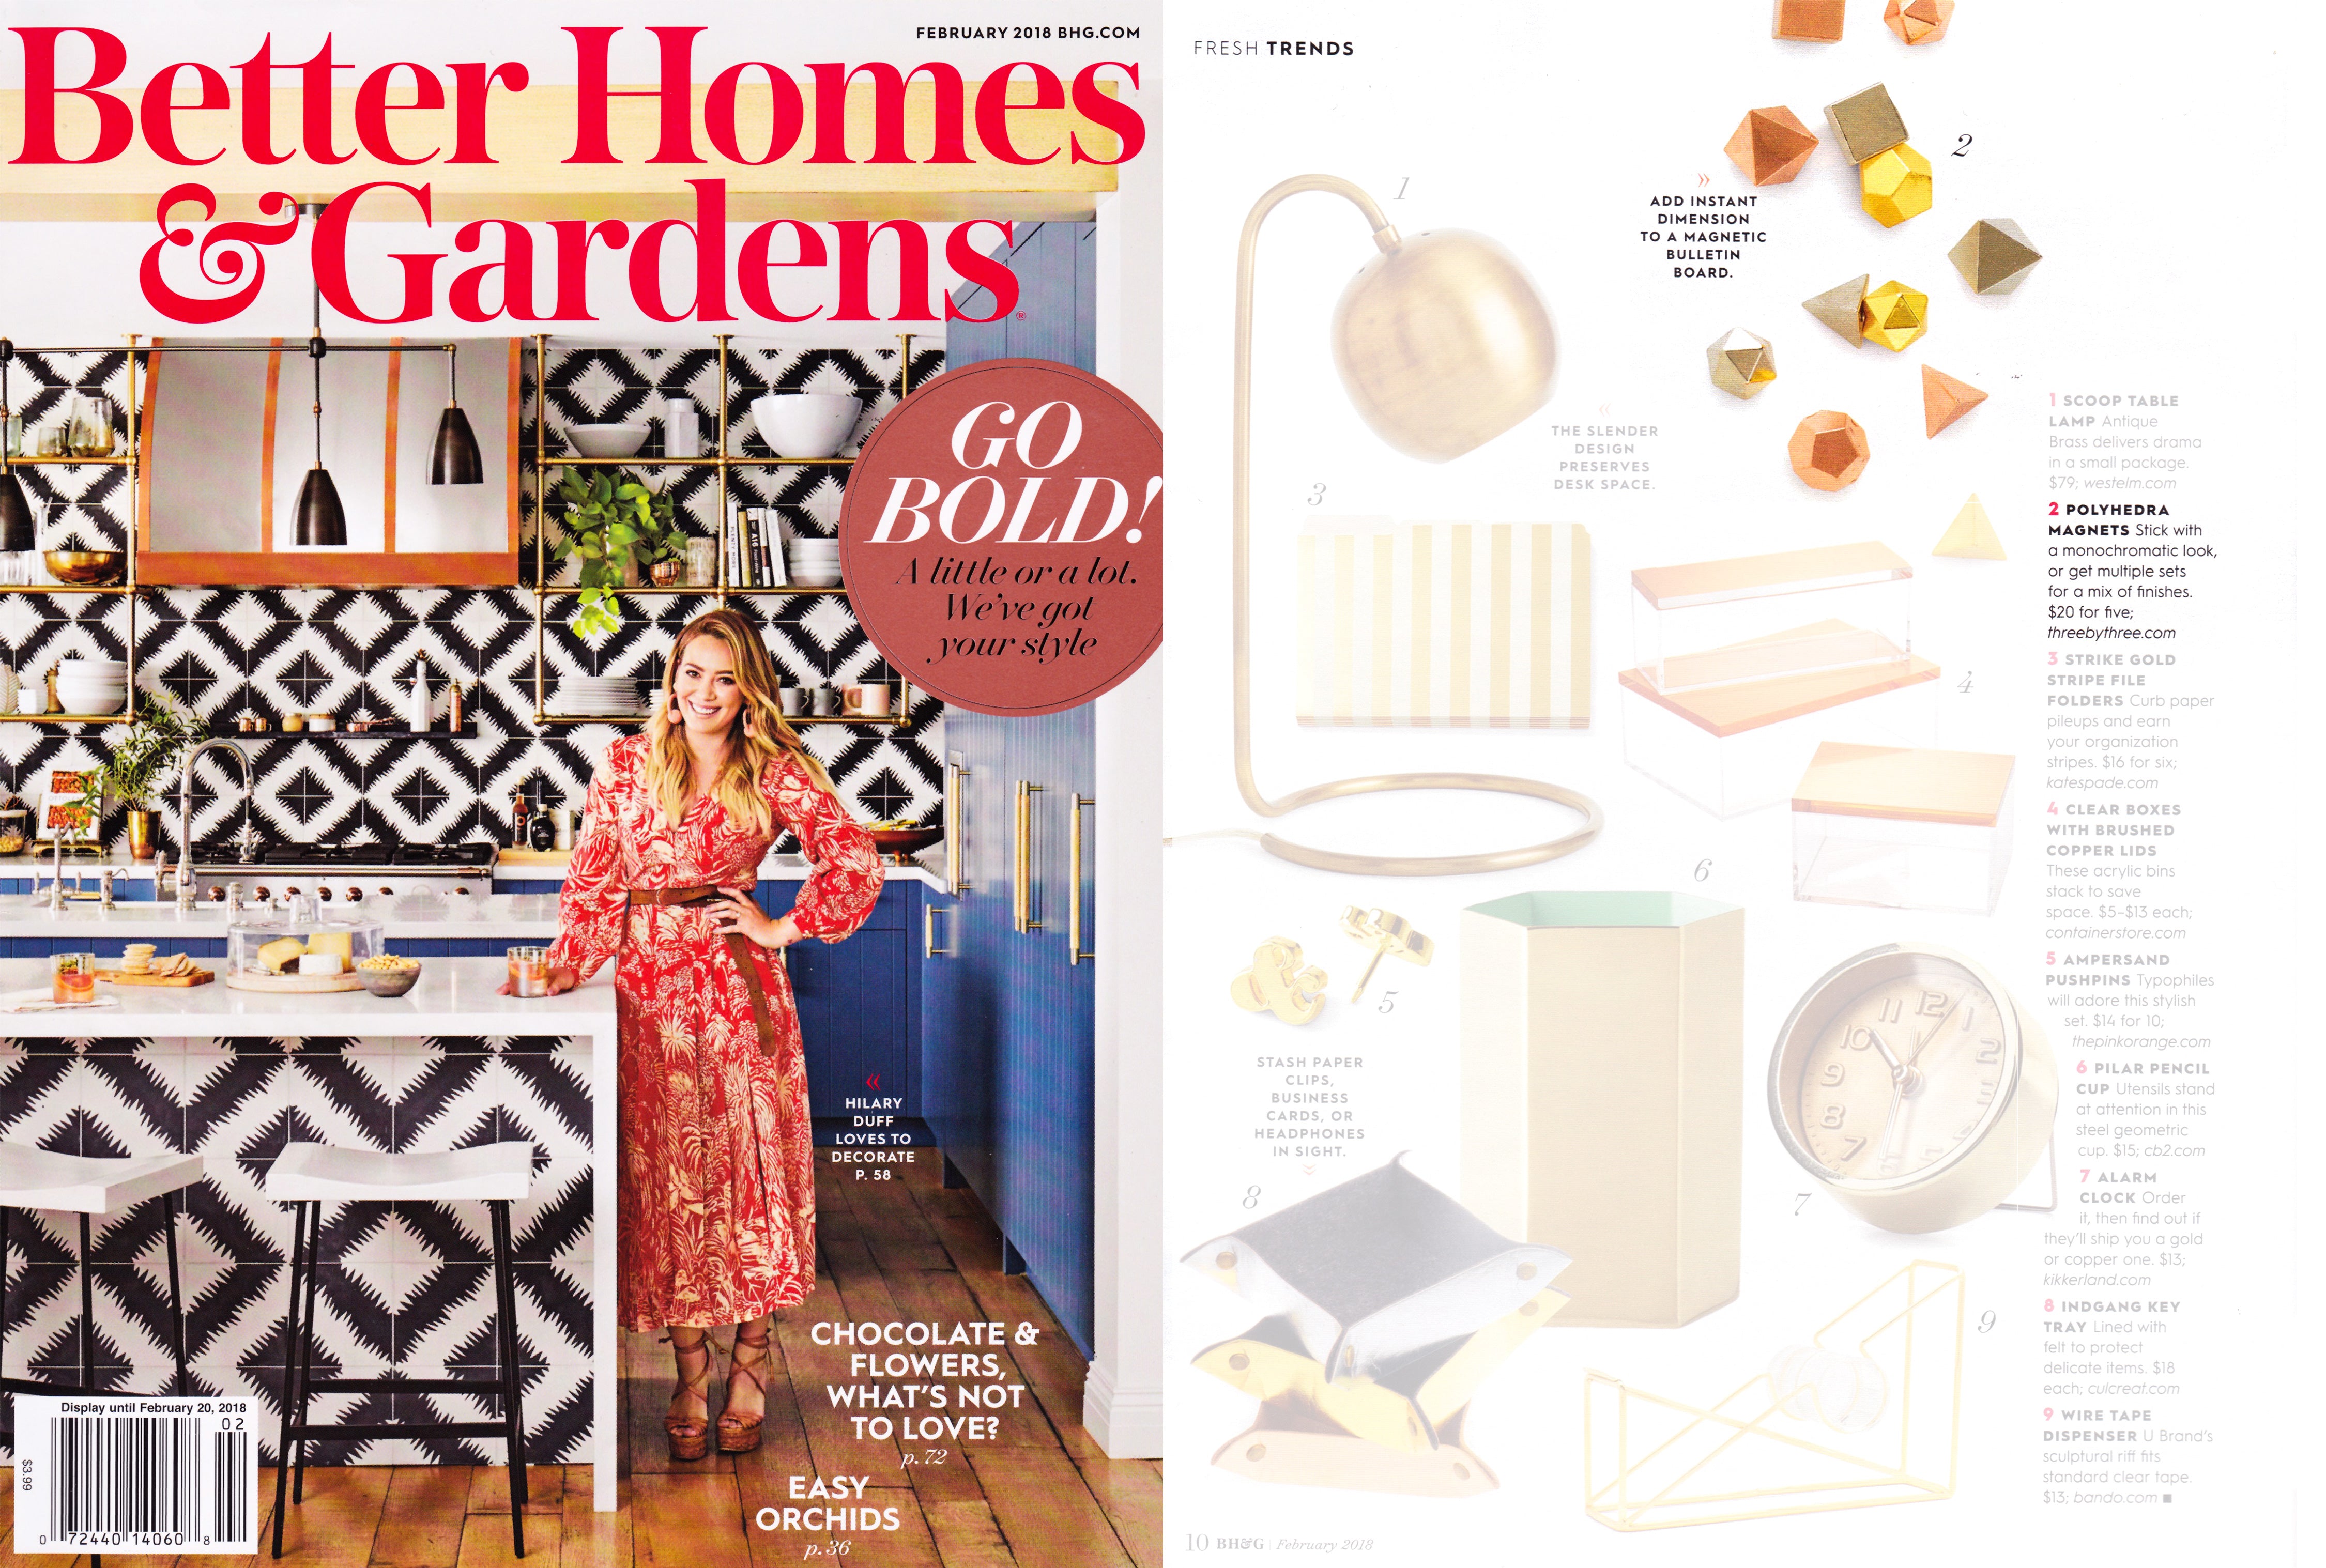 Polyhedra magnets featured in Better Homes & Gardens magazine